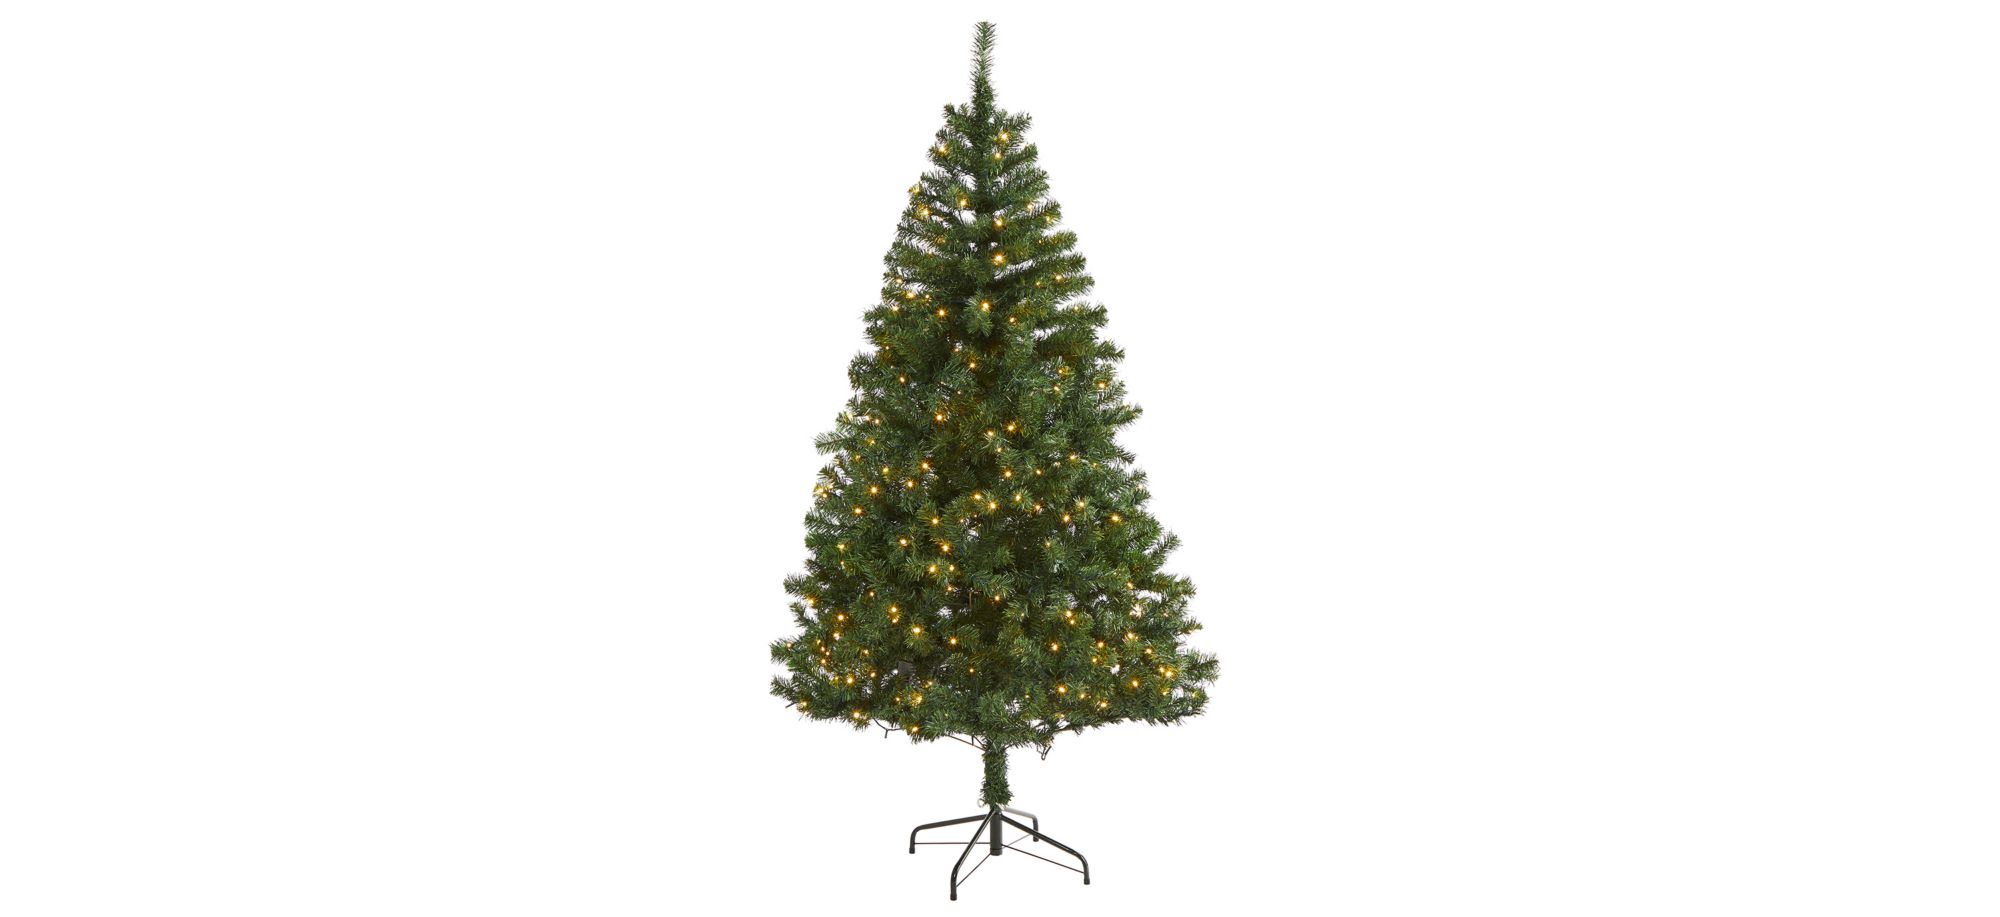 6ft. Pre-Lit Northern Tip Pine Artificial Christmas Tree in Green by Bellanest